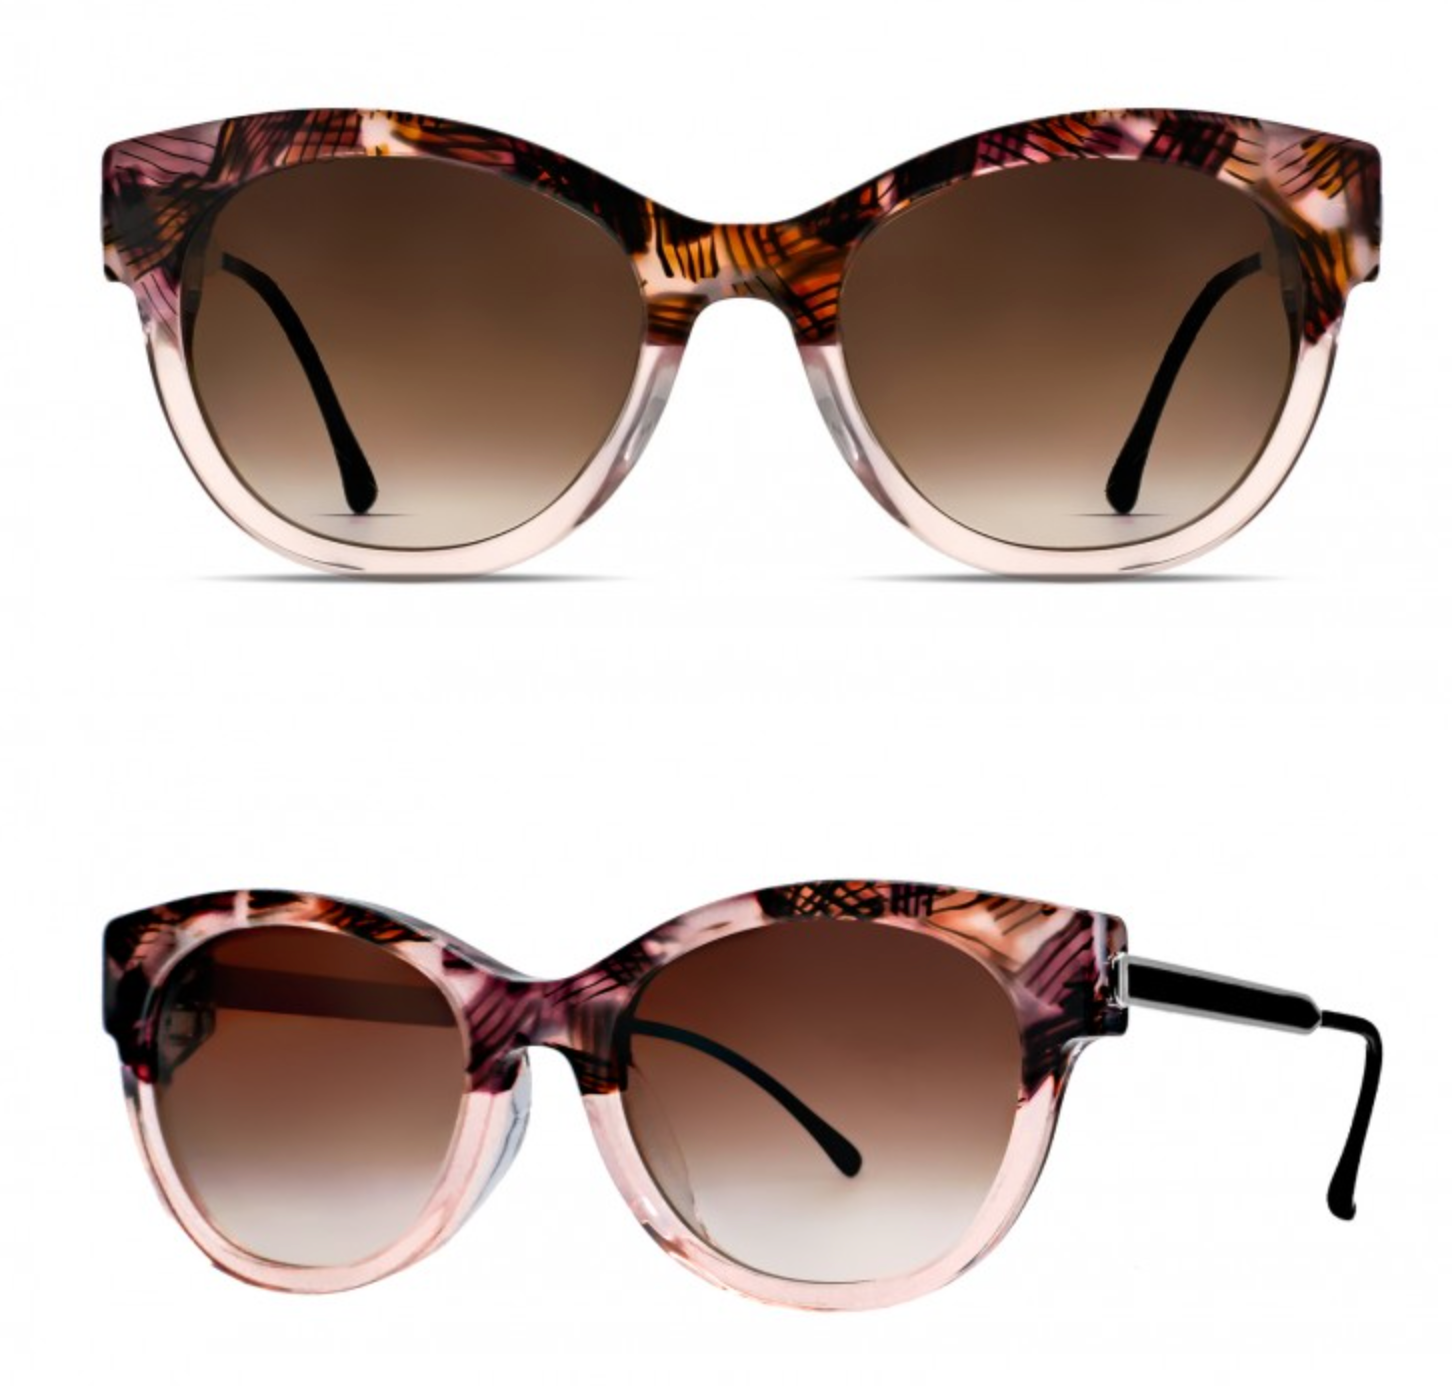 Thierry Lasry - Peachy